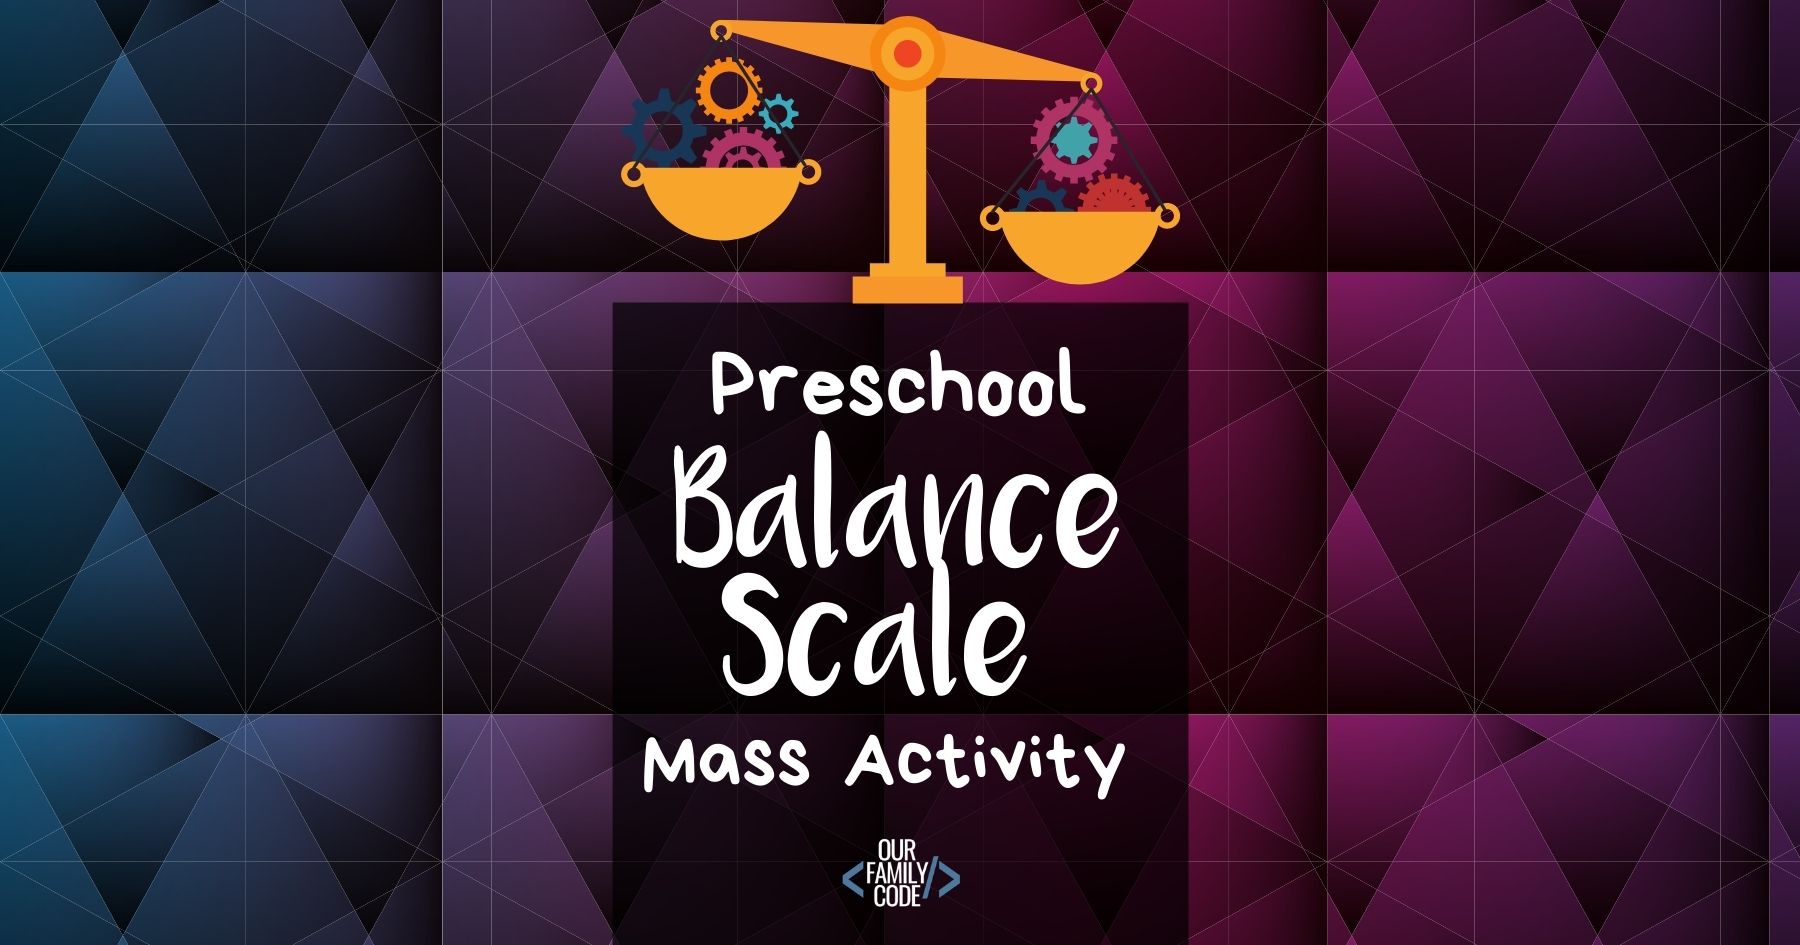 Make your own balance scale to compare household items and measure them by mass with this preschool balance scale activity! #STEAMactivities #preschoolSTEAM #littleengineers #kidengineers #simplemachines #DIYbalancescale #STEMactivities #engineeringactivitiesforkids